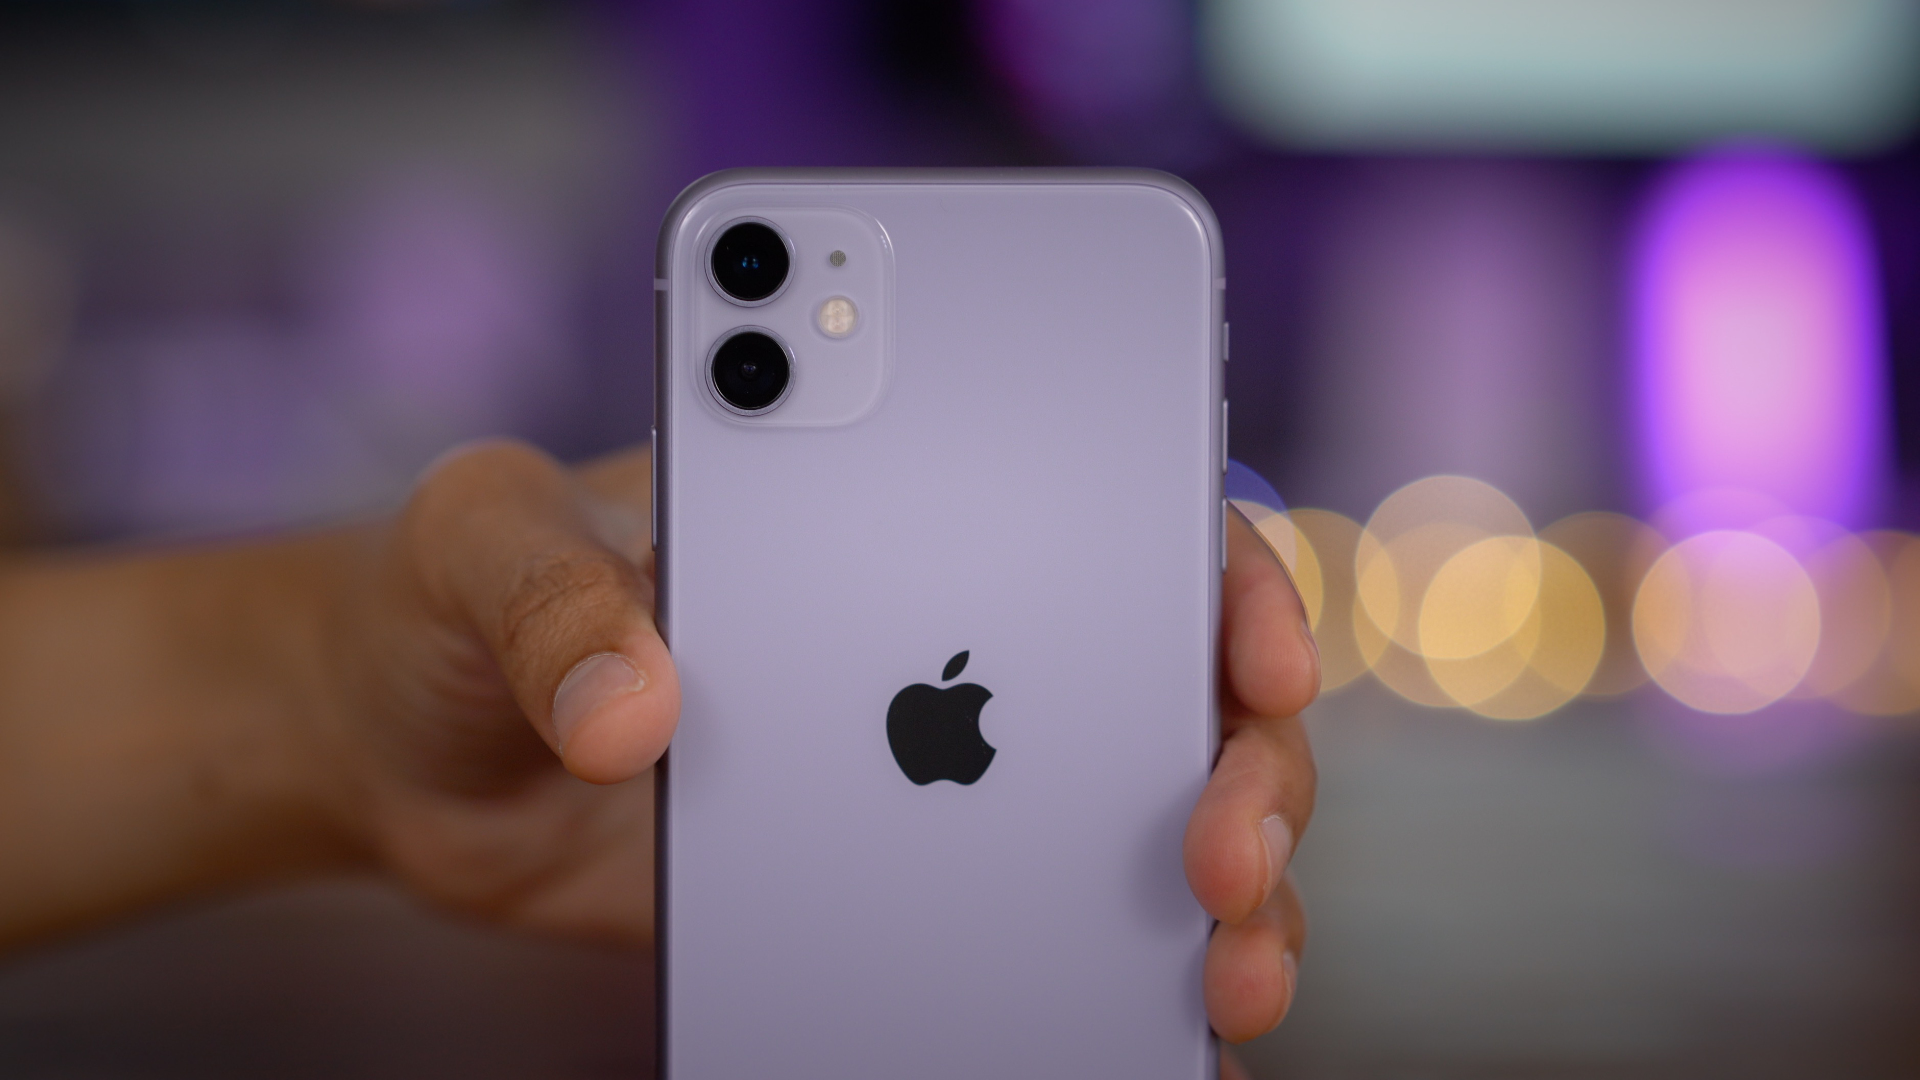 Iphone 11 Now The World S Most Popular Smartphone As It Surpasses Iphone Xr 9to5mac